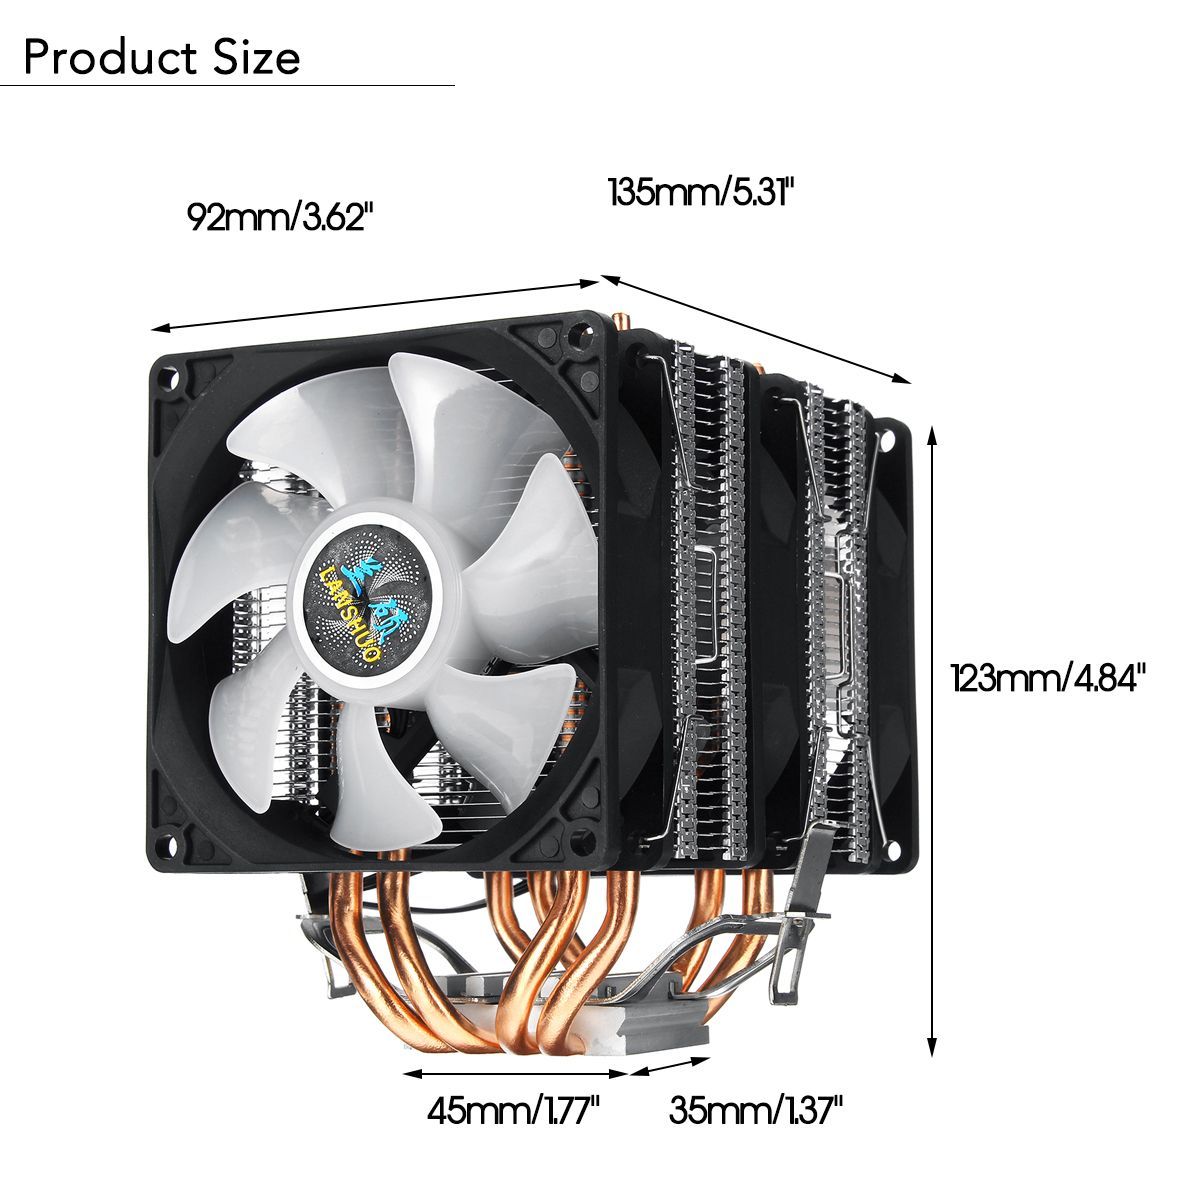 3-Pin-Triple-Fans-Four-Copper-Heat-Pipes-Colorful-LED-Light-CPU-Cooling-Fan-Cooler-Heatsink-for-Inte-1475719